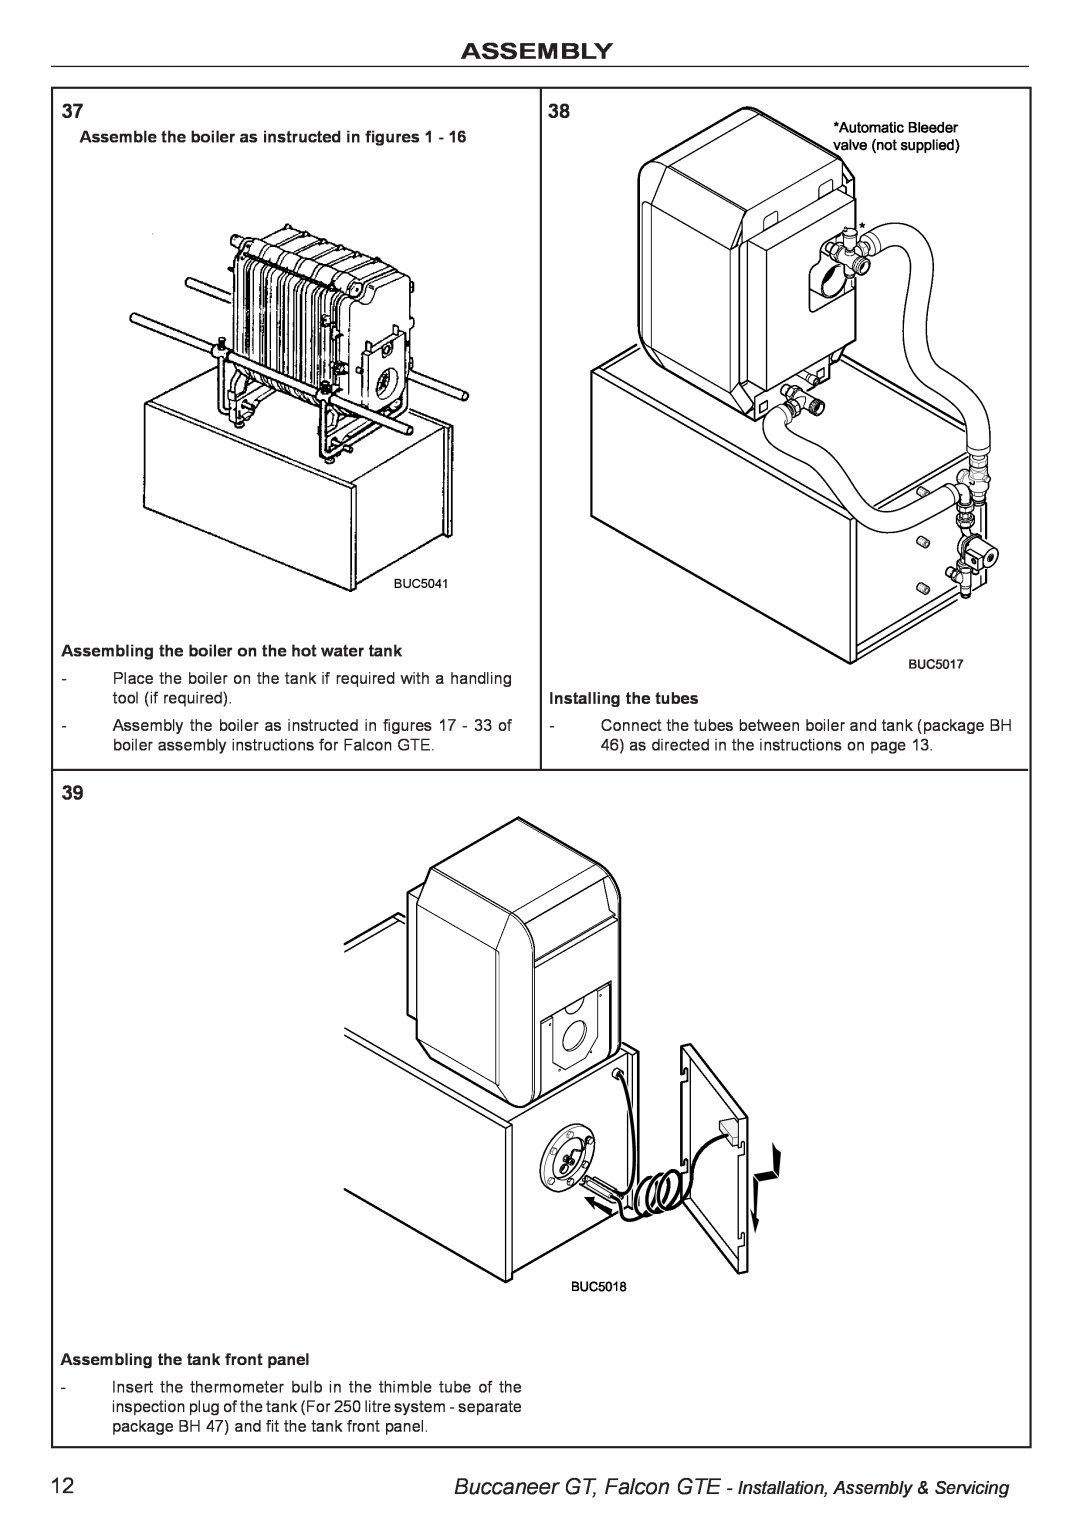 IDEAL INDUSTRIES BUC5034 manual Assemble the boiler as instructed in figures, Assembling the boiler on the hot water tank 